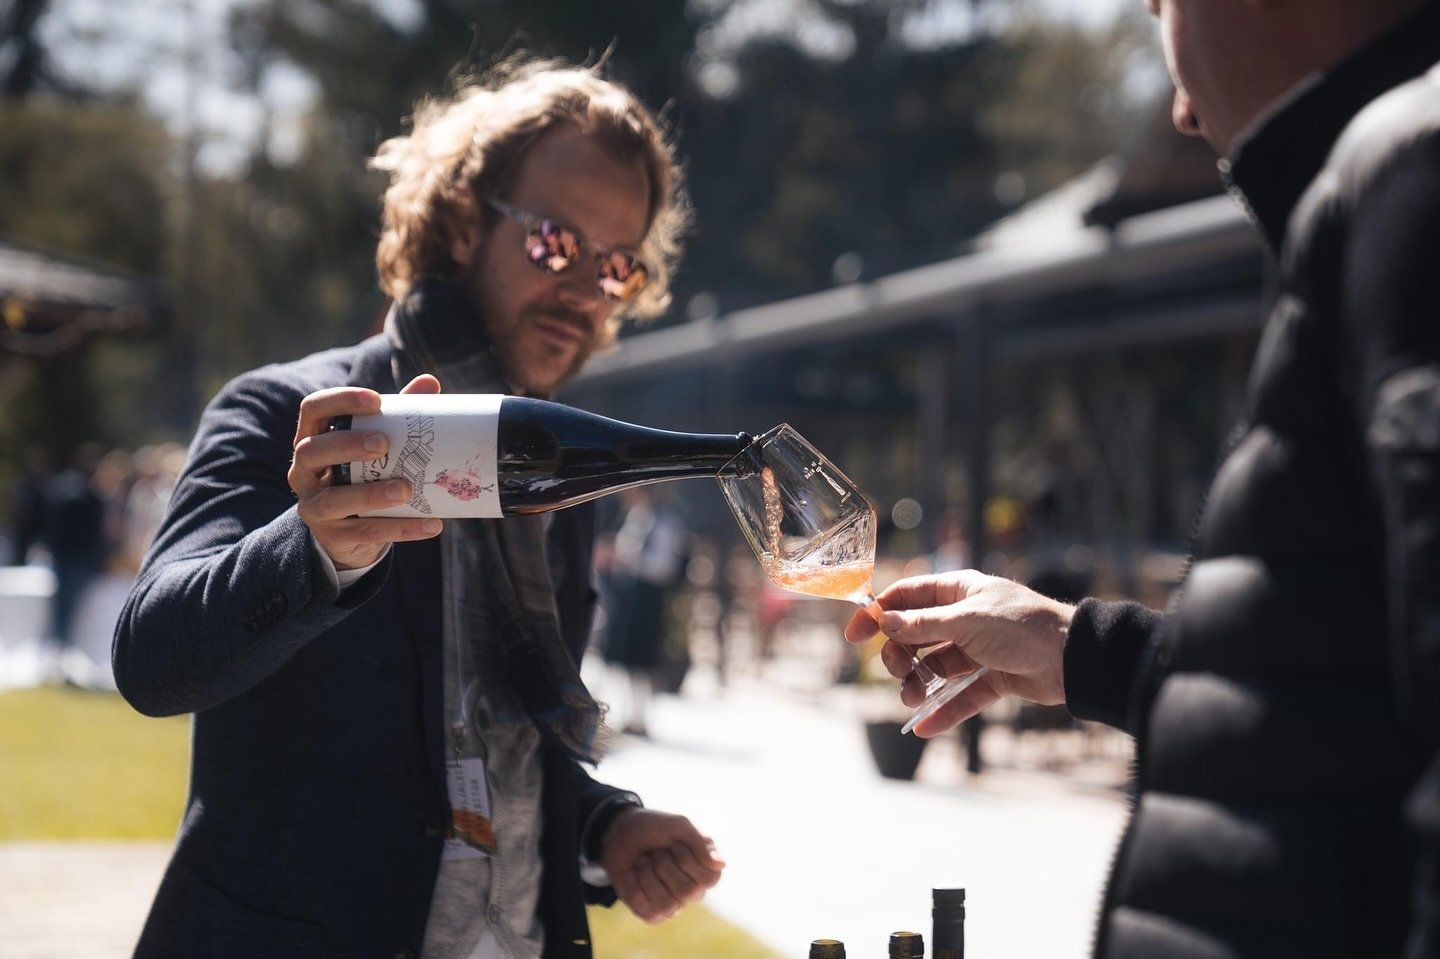 Come along as we unravel the story of RURALL, one sip at a time. 🍷

https://rurall.com

#RURALL #RURALLexperience #RURALLcommunity #community #winefestival #festival #wineevent #event #wine #winelover #winetasting #winecountry #dobrordeče2018 #dobro